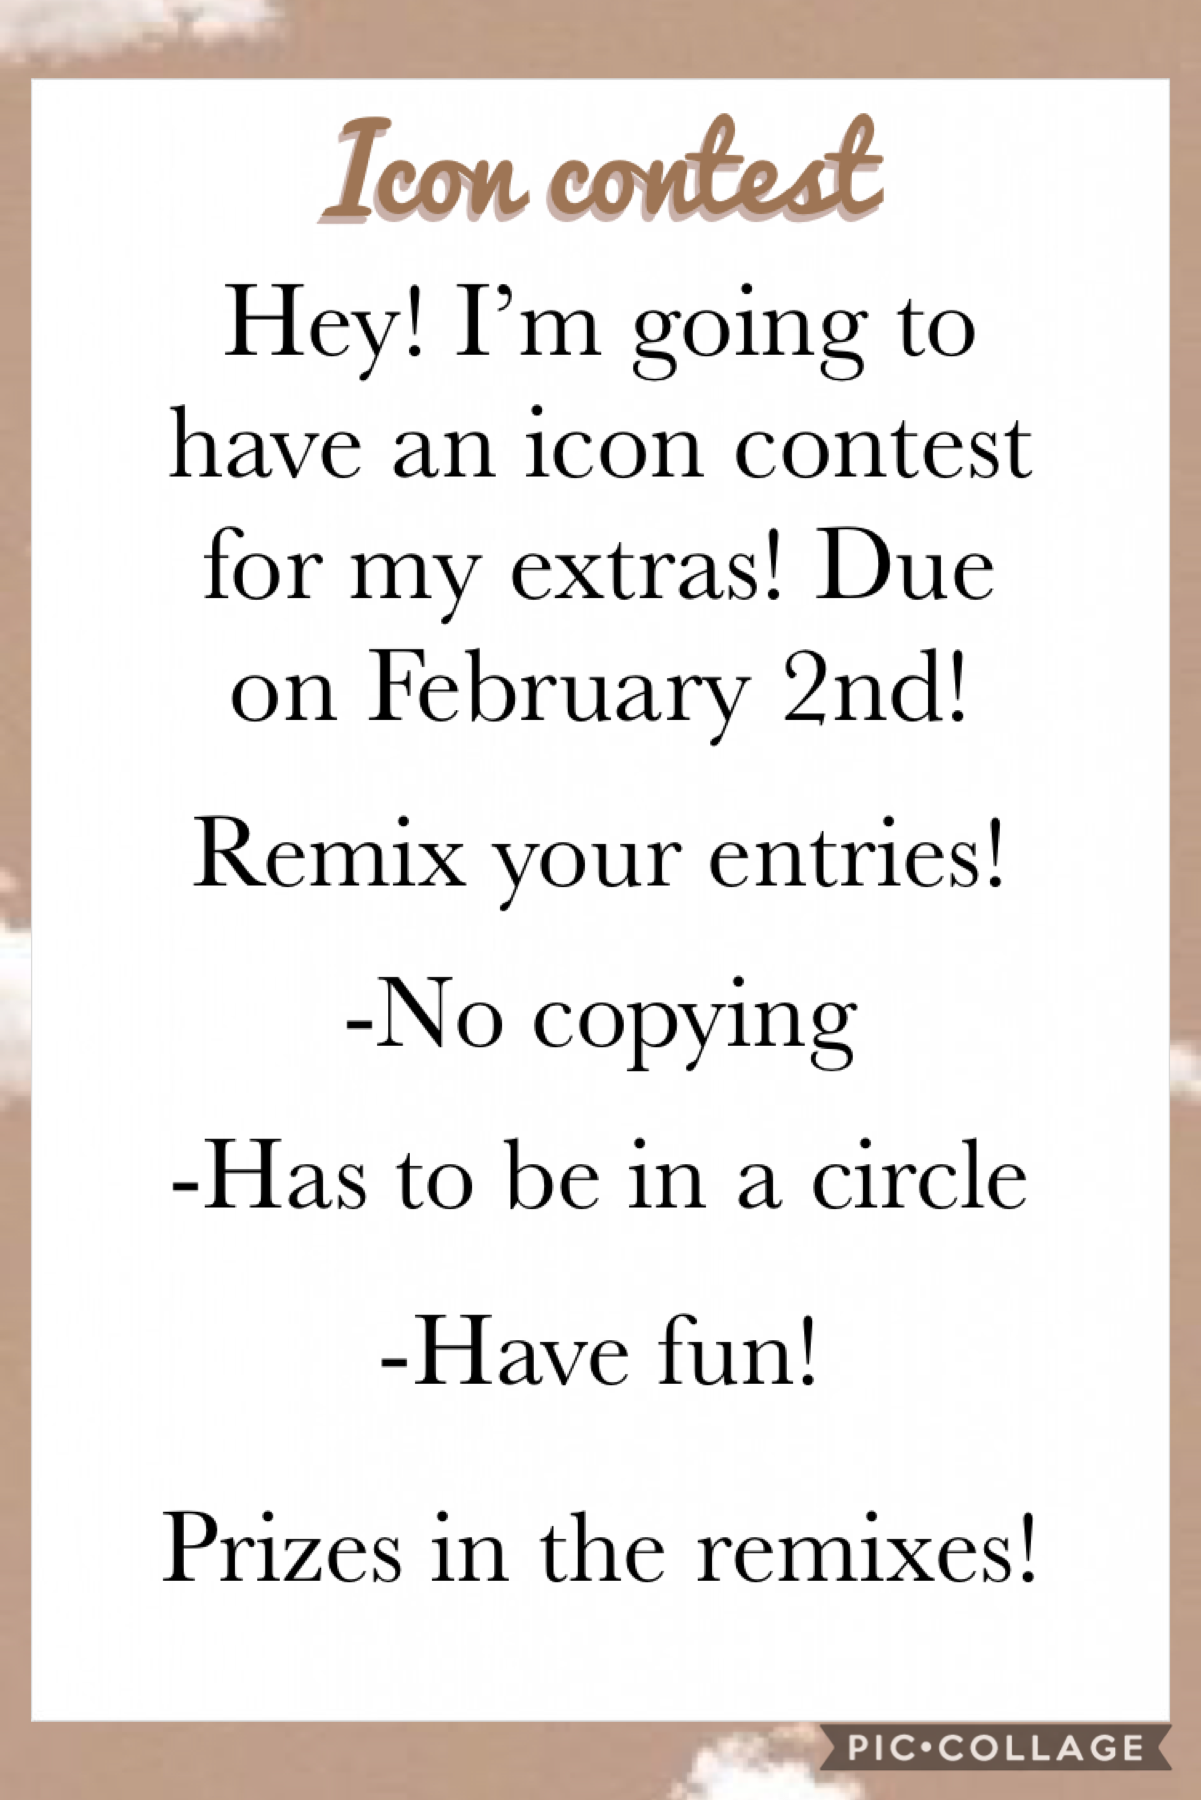 ☁️Icon contest☁️
Due on February 2nd!! Good luck!!